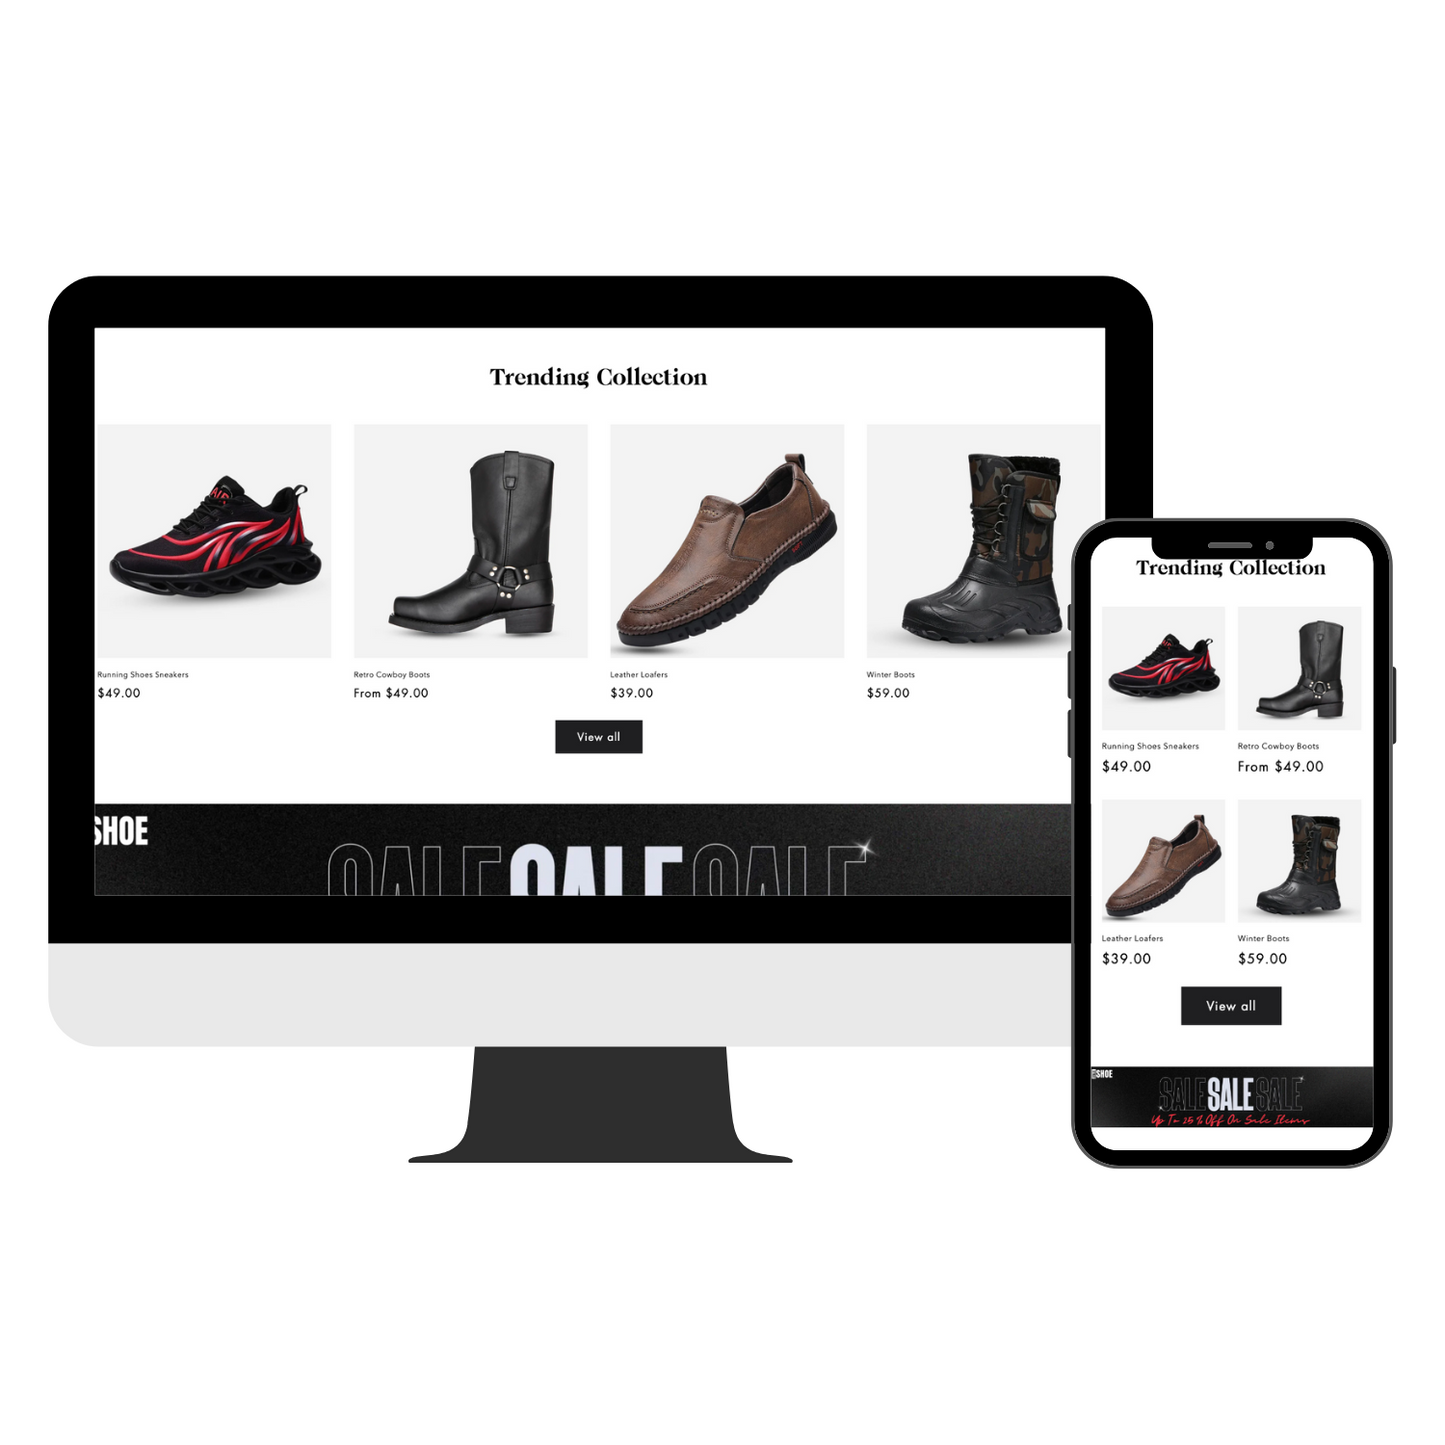 Street Shoe - Ready Made Sneaker Store based on Shopify